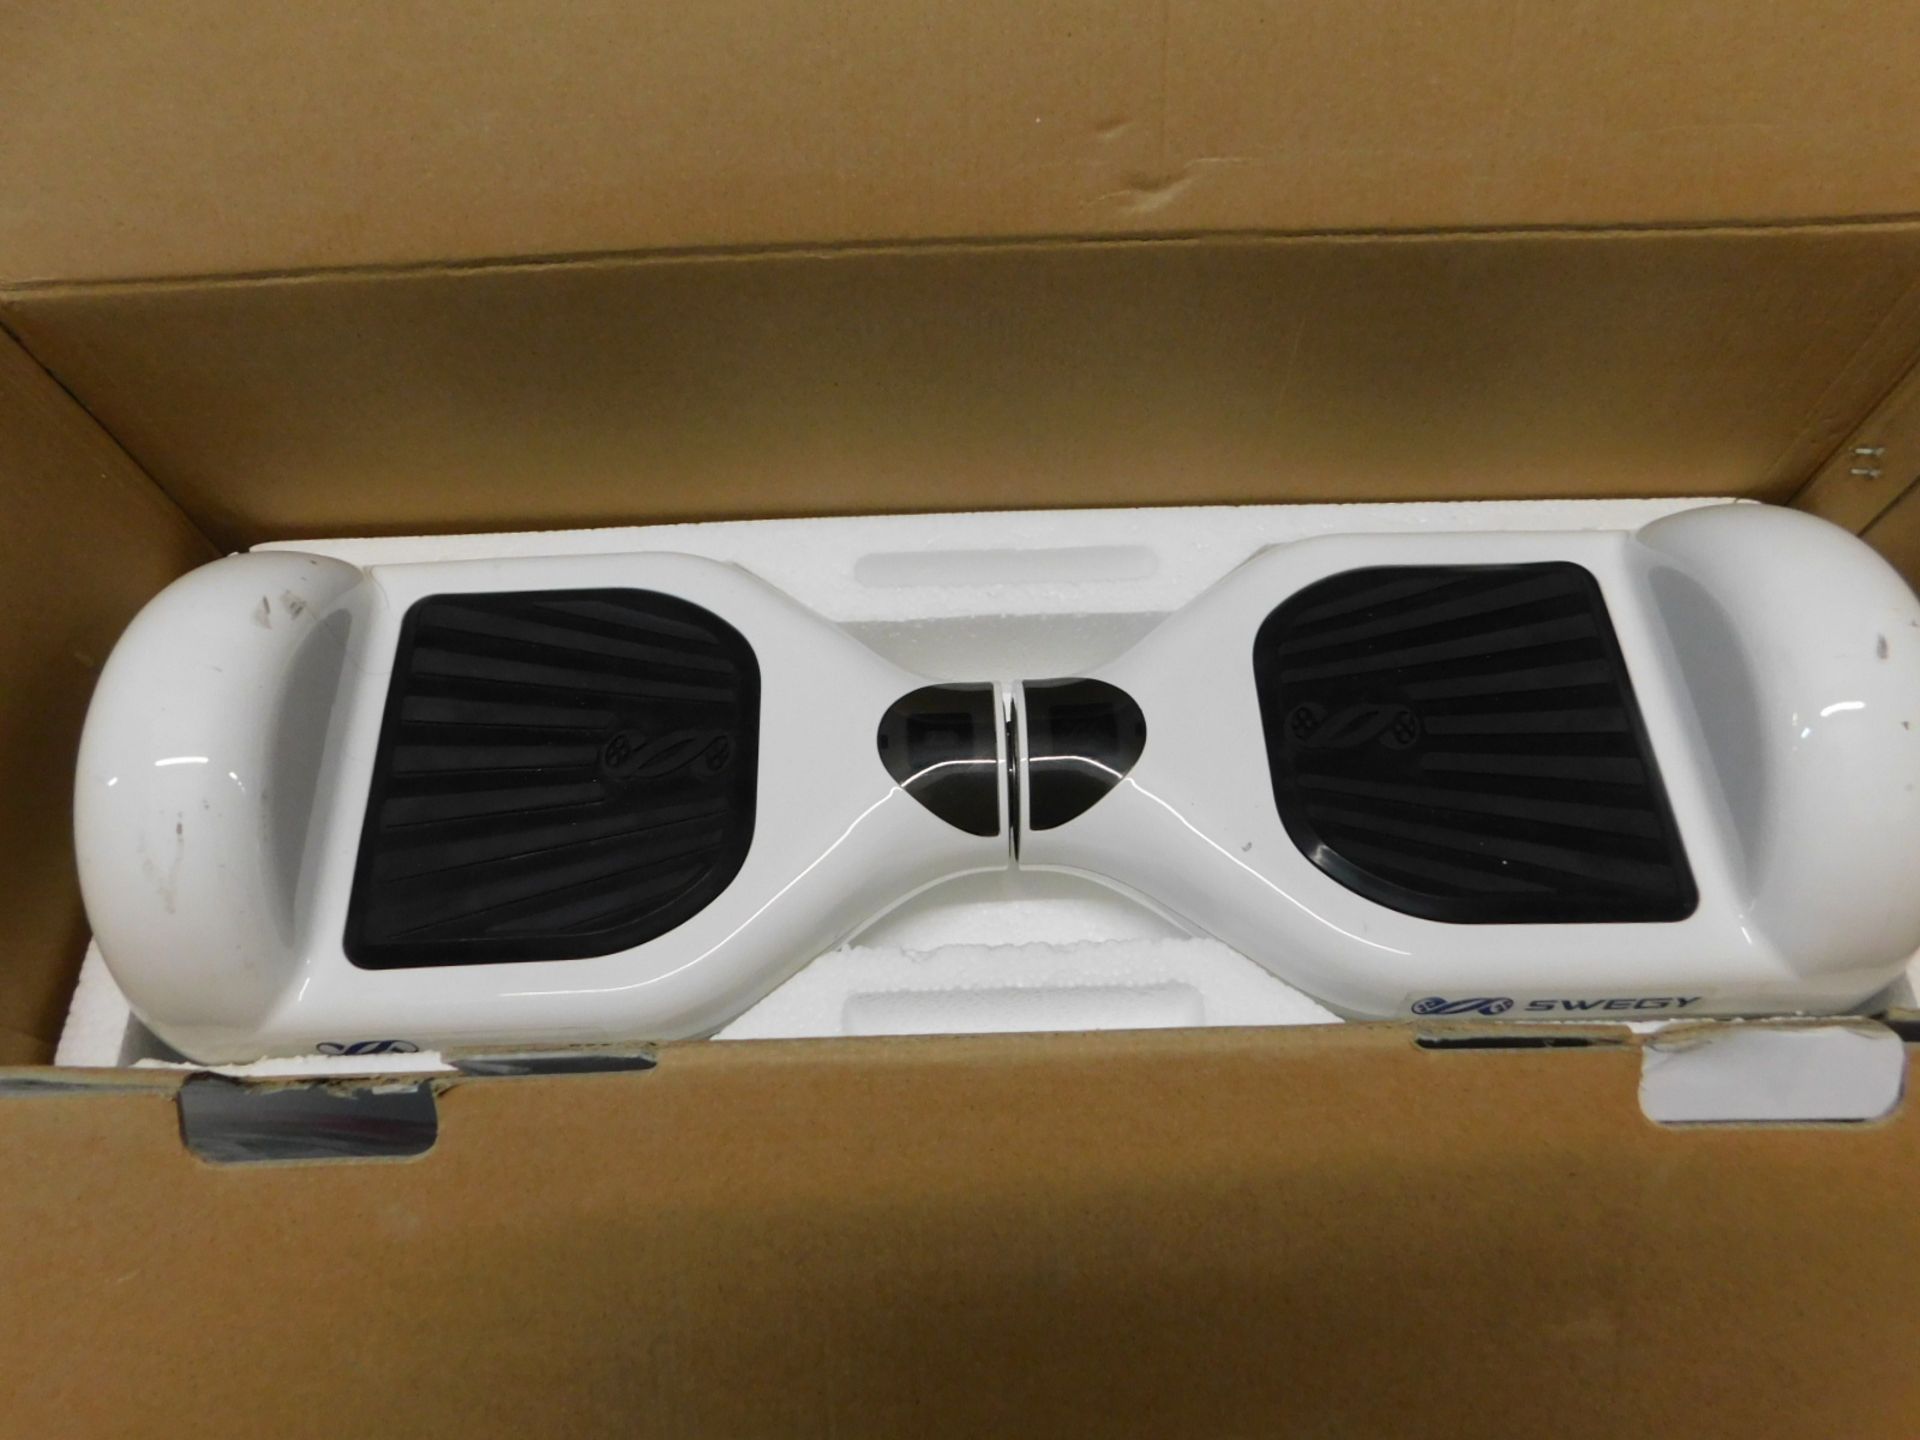 1 BOXED SMART BALANCE WHEEL HOVERBOARD IN WHITE WITH CHARGER RRP Â£299 (TESTED & WORKING)